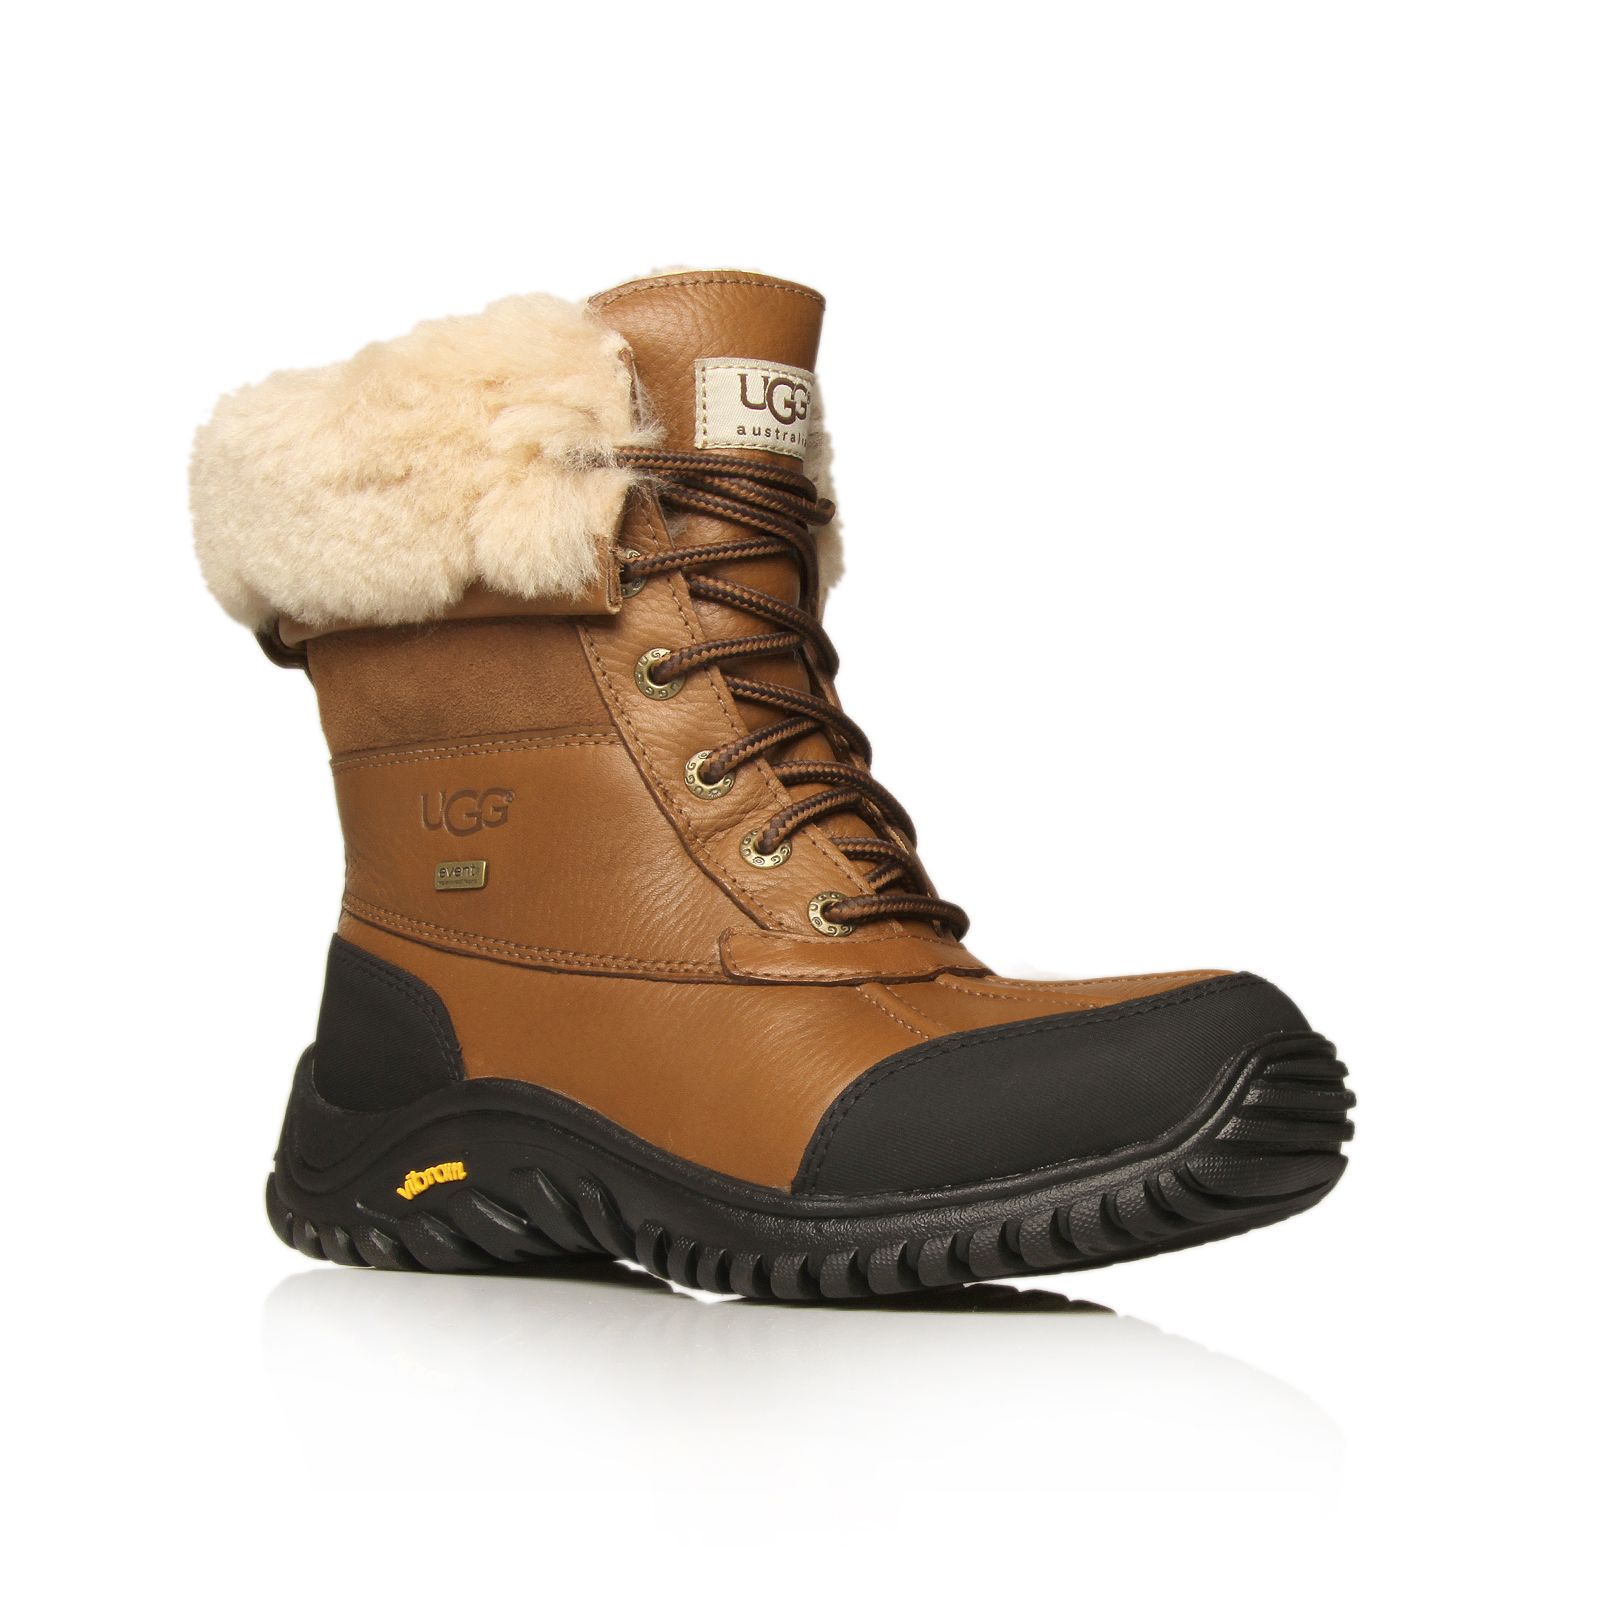 Lyst - Ugg Adirondack Ii Boots in Brown for Men